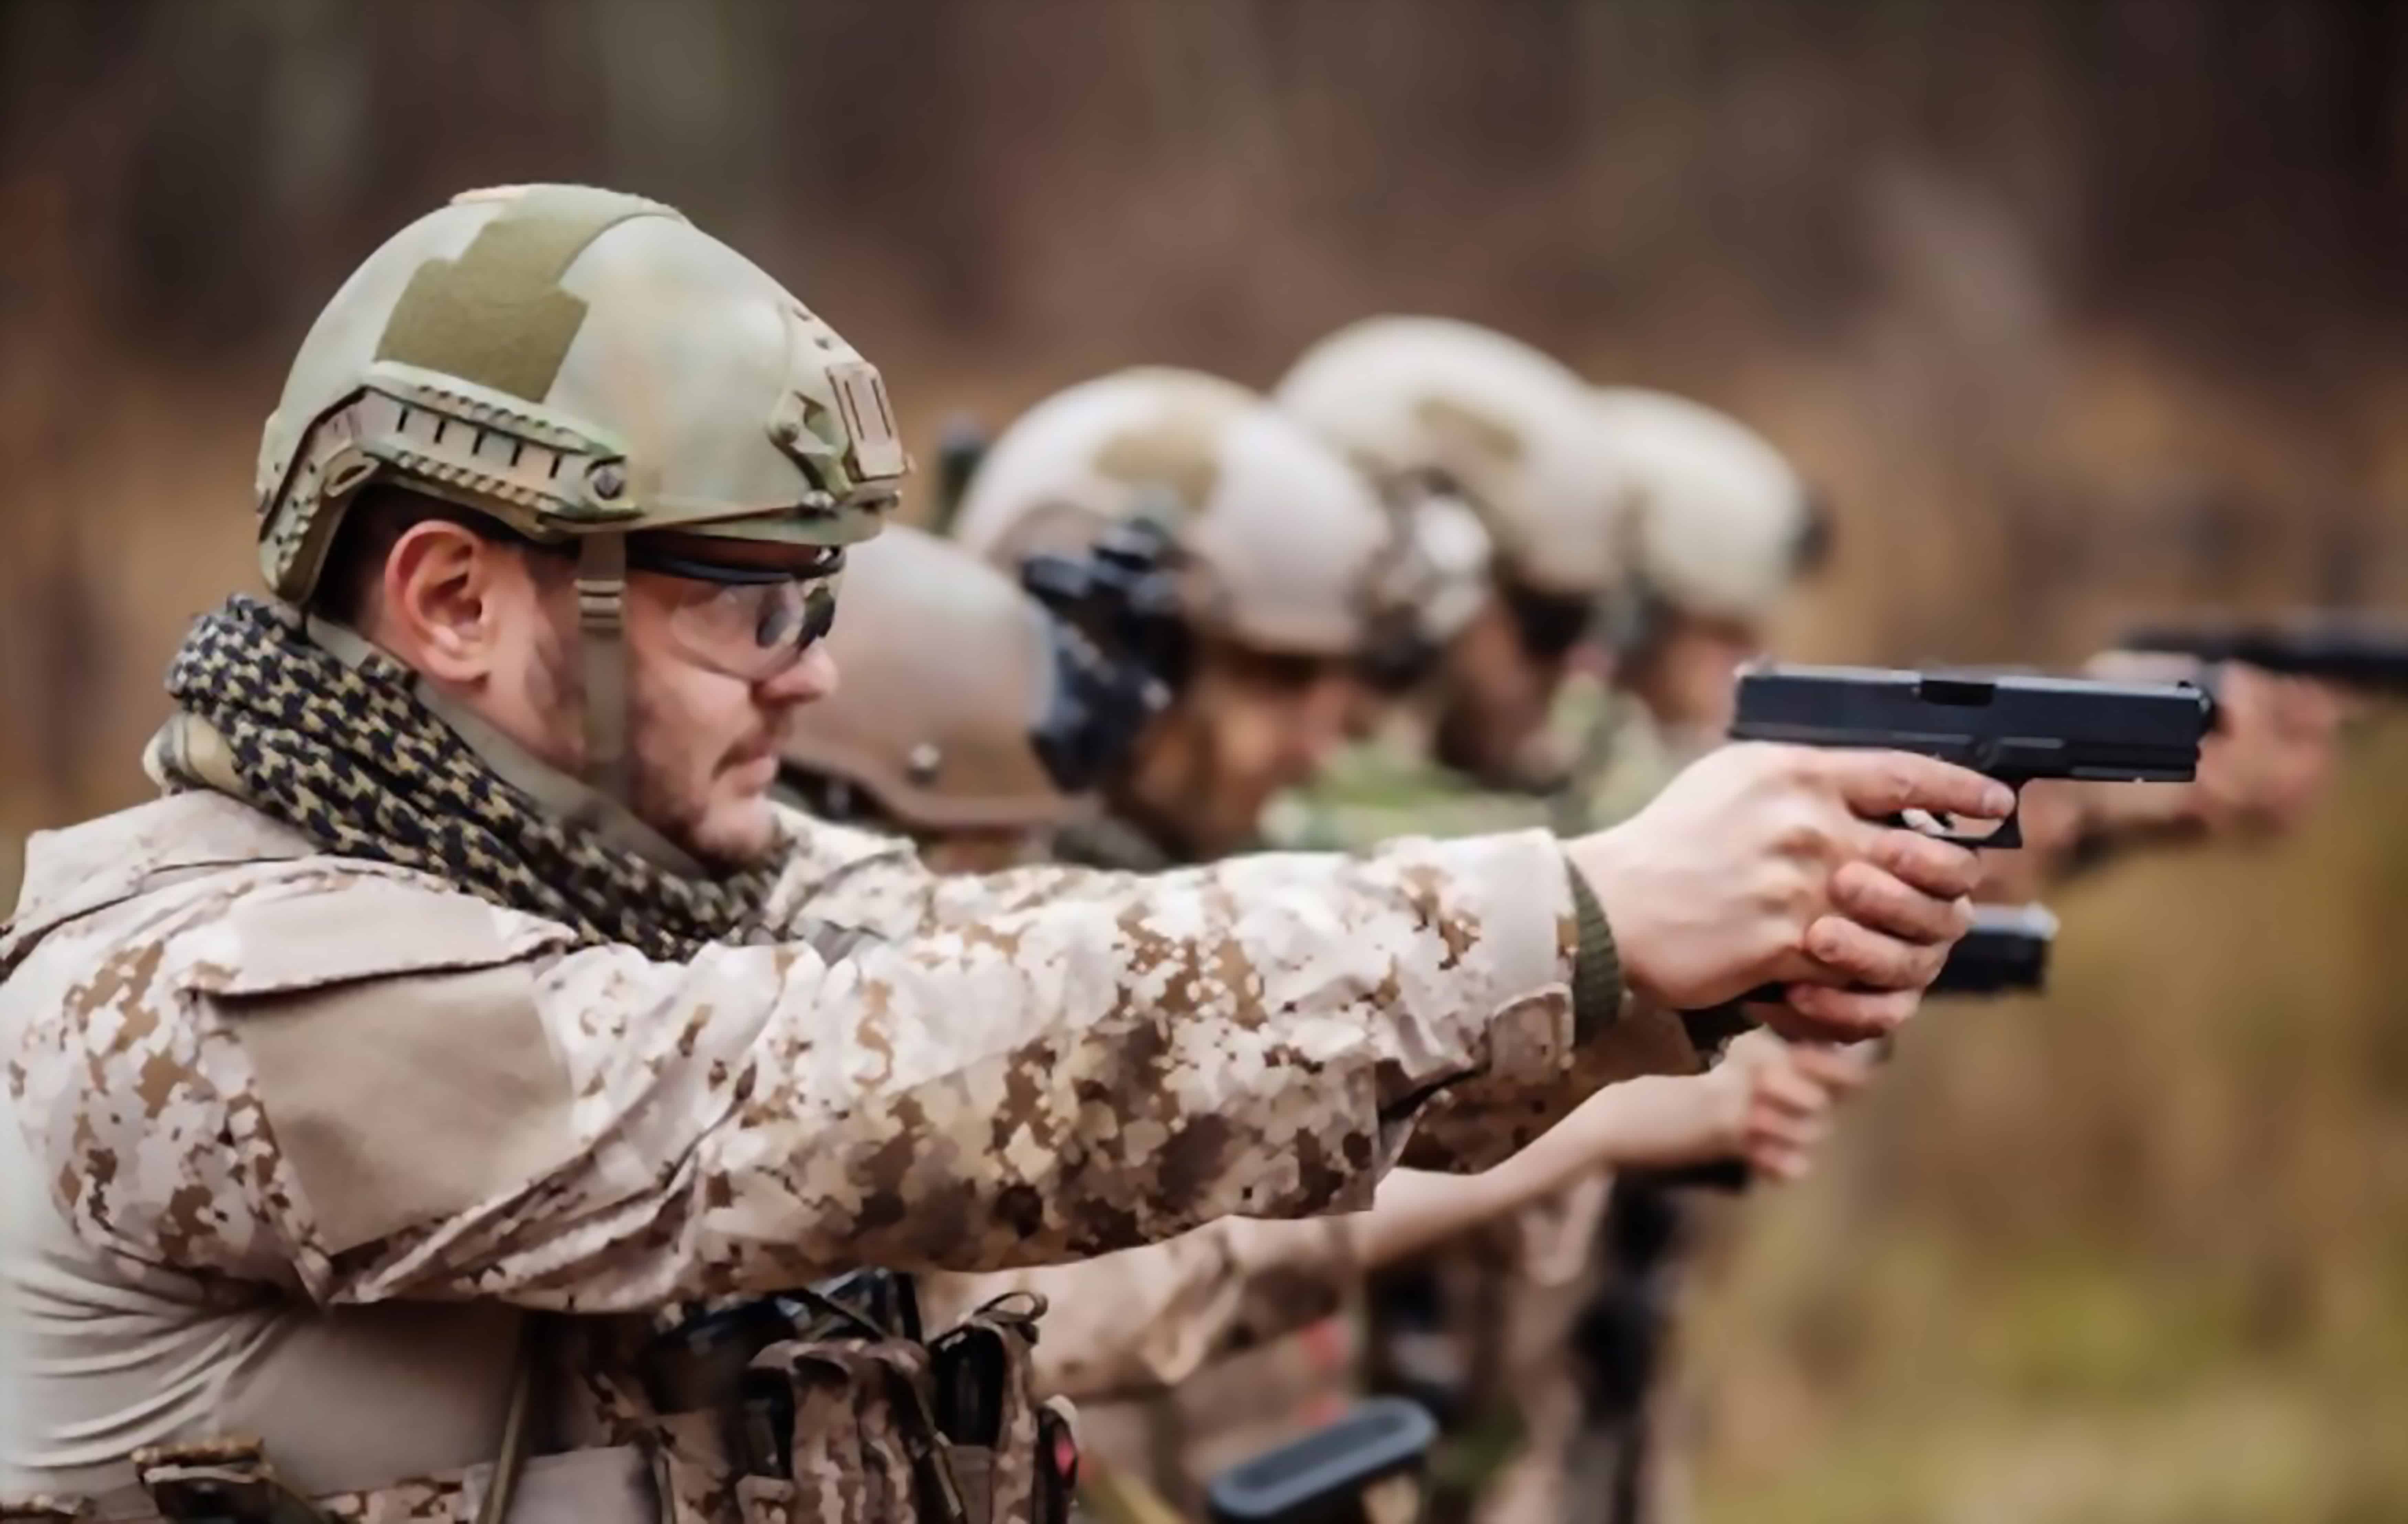 Benefits of CHL Texas for Military Service Members - LTC Range - Texas Carry Class For Military Members - Online Carry Class - Military Concealed Carry - Simple Nationwide Concealed Carry for Qualified Military Personnel and Veterans